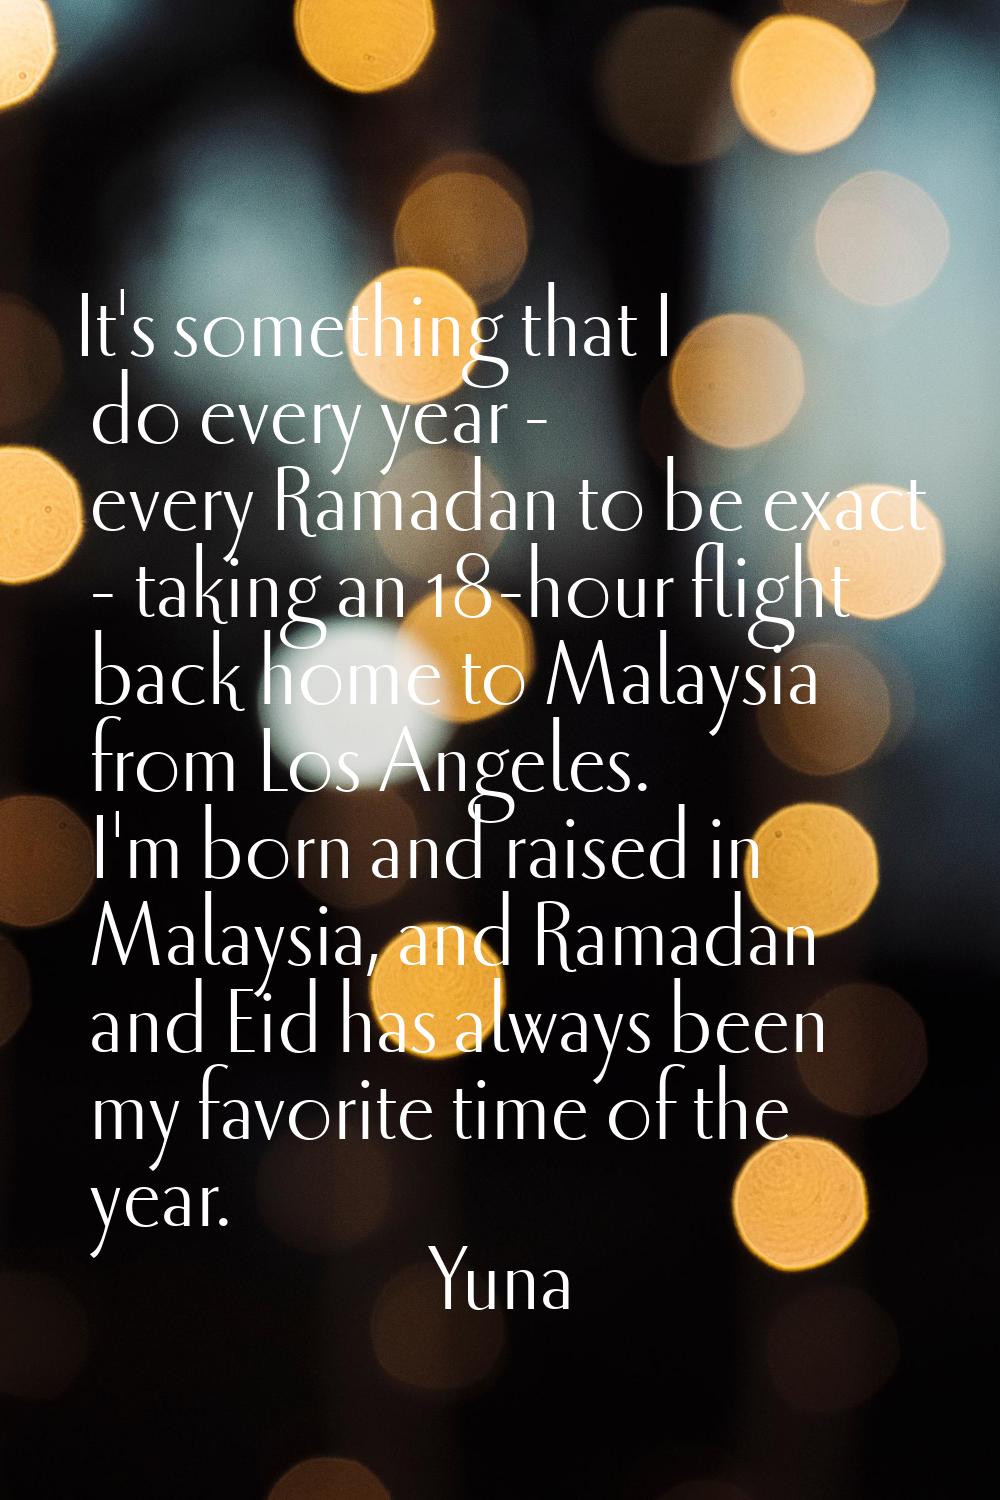 It's something that I do every year - every Ramadan to be exact - taking an 18-hour flight back hom